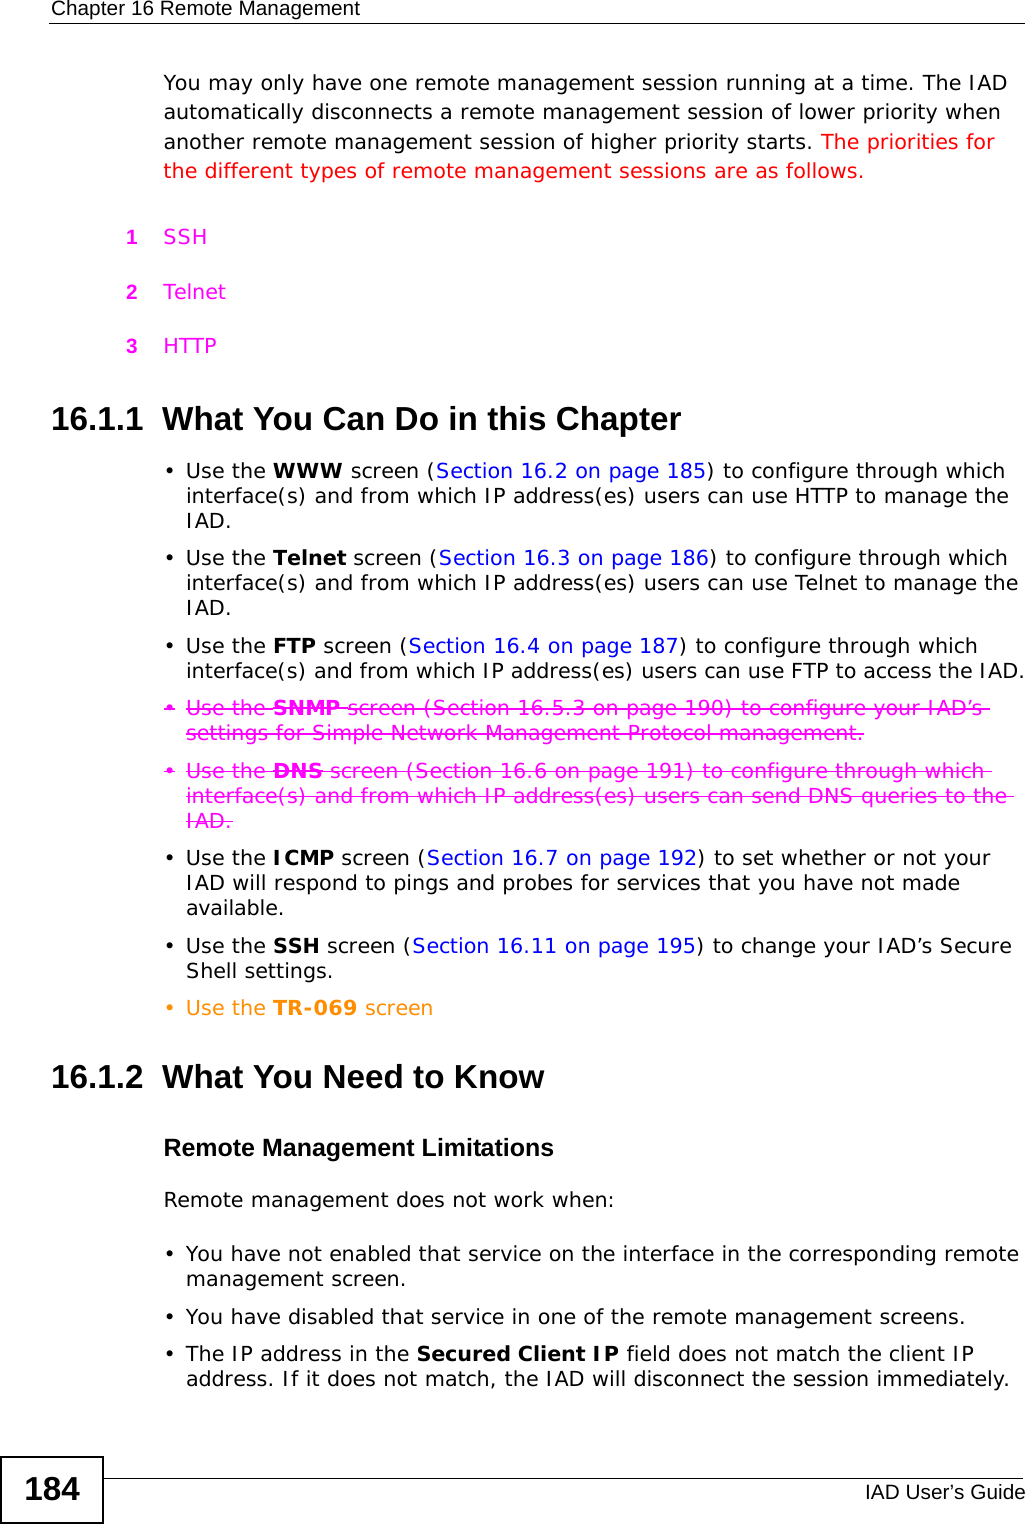 Chapter 16 Remote ManagementIAD User’s Guide184You may only have one remote management session running at a time. The IAD automatically disconnects a remote management session of lower priority when another remote management session of higher priority starts. The priorities for the different types of remote management sessions are as follows.1SSH2Telnet3HTTP16.1.1  What You Can Do in this Chapter•Use the WWW screen (Section 16.2 on page 185) to configure through which interface(s) and from which IP address(es) users can use HTTP to manage the IAD.•Use the Telnet screen (Section 16.3 on page 186) to configure through which interface(s) and from which IP address(es) users can use Telnet to manage the IAD.•Use the FTP screen (Section 16.4 on page 187) to configure through which interface(s) and from which IP address(es) users can use FTP to access the IAD.•Use the SNMP screen (Section 16.5.3 on page 190) to configure your IAD’s settings for Simple Network Management Protocol management.•Use the DNS screen (Section 16.6 on page 191) to configure through which interface(s) and from which IP address(es) users can send DNS queries to the IAD.•Use the ICMP screen (Section 16.7 on page 192) to set whether or not your IAD will respond to pings and probes for services that you have not made available.•Use the SSH screen (Section 16.11 on page 195) to change your IAD’s Secure Shell settings.•Use the TR-069 screen16.1.2  What You Need to KnowRemote Management LimitationsRemote management does not work when:• You have not enabled that service on the interface in the corresponding remote management screen.• You have disabled that service in one of the remote management screens.• The IP address in the Secured Client IP field does not match the client IP address. If it does not match, the IAD will disconnect the session immediately.